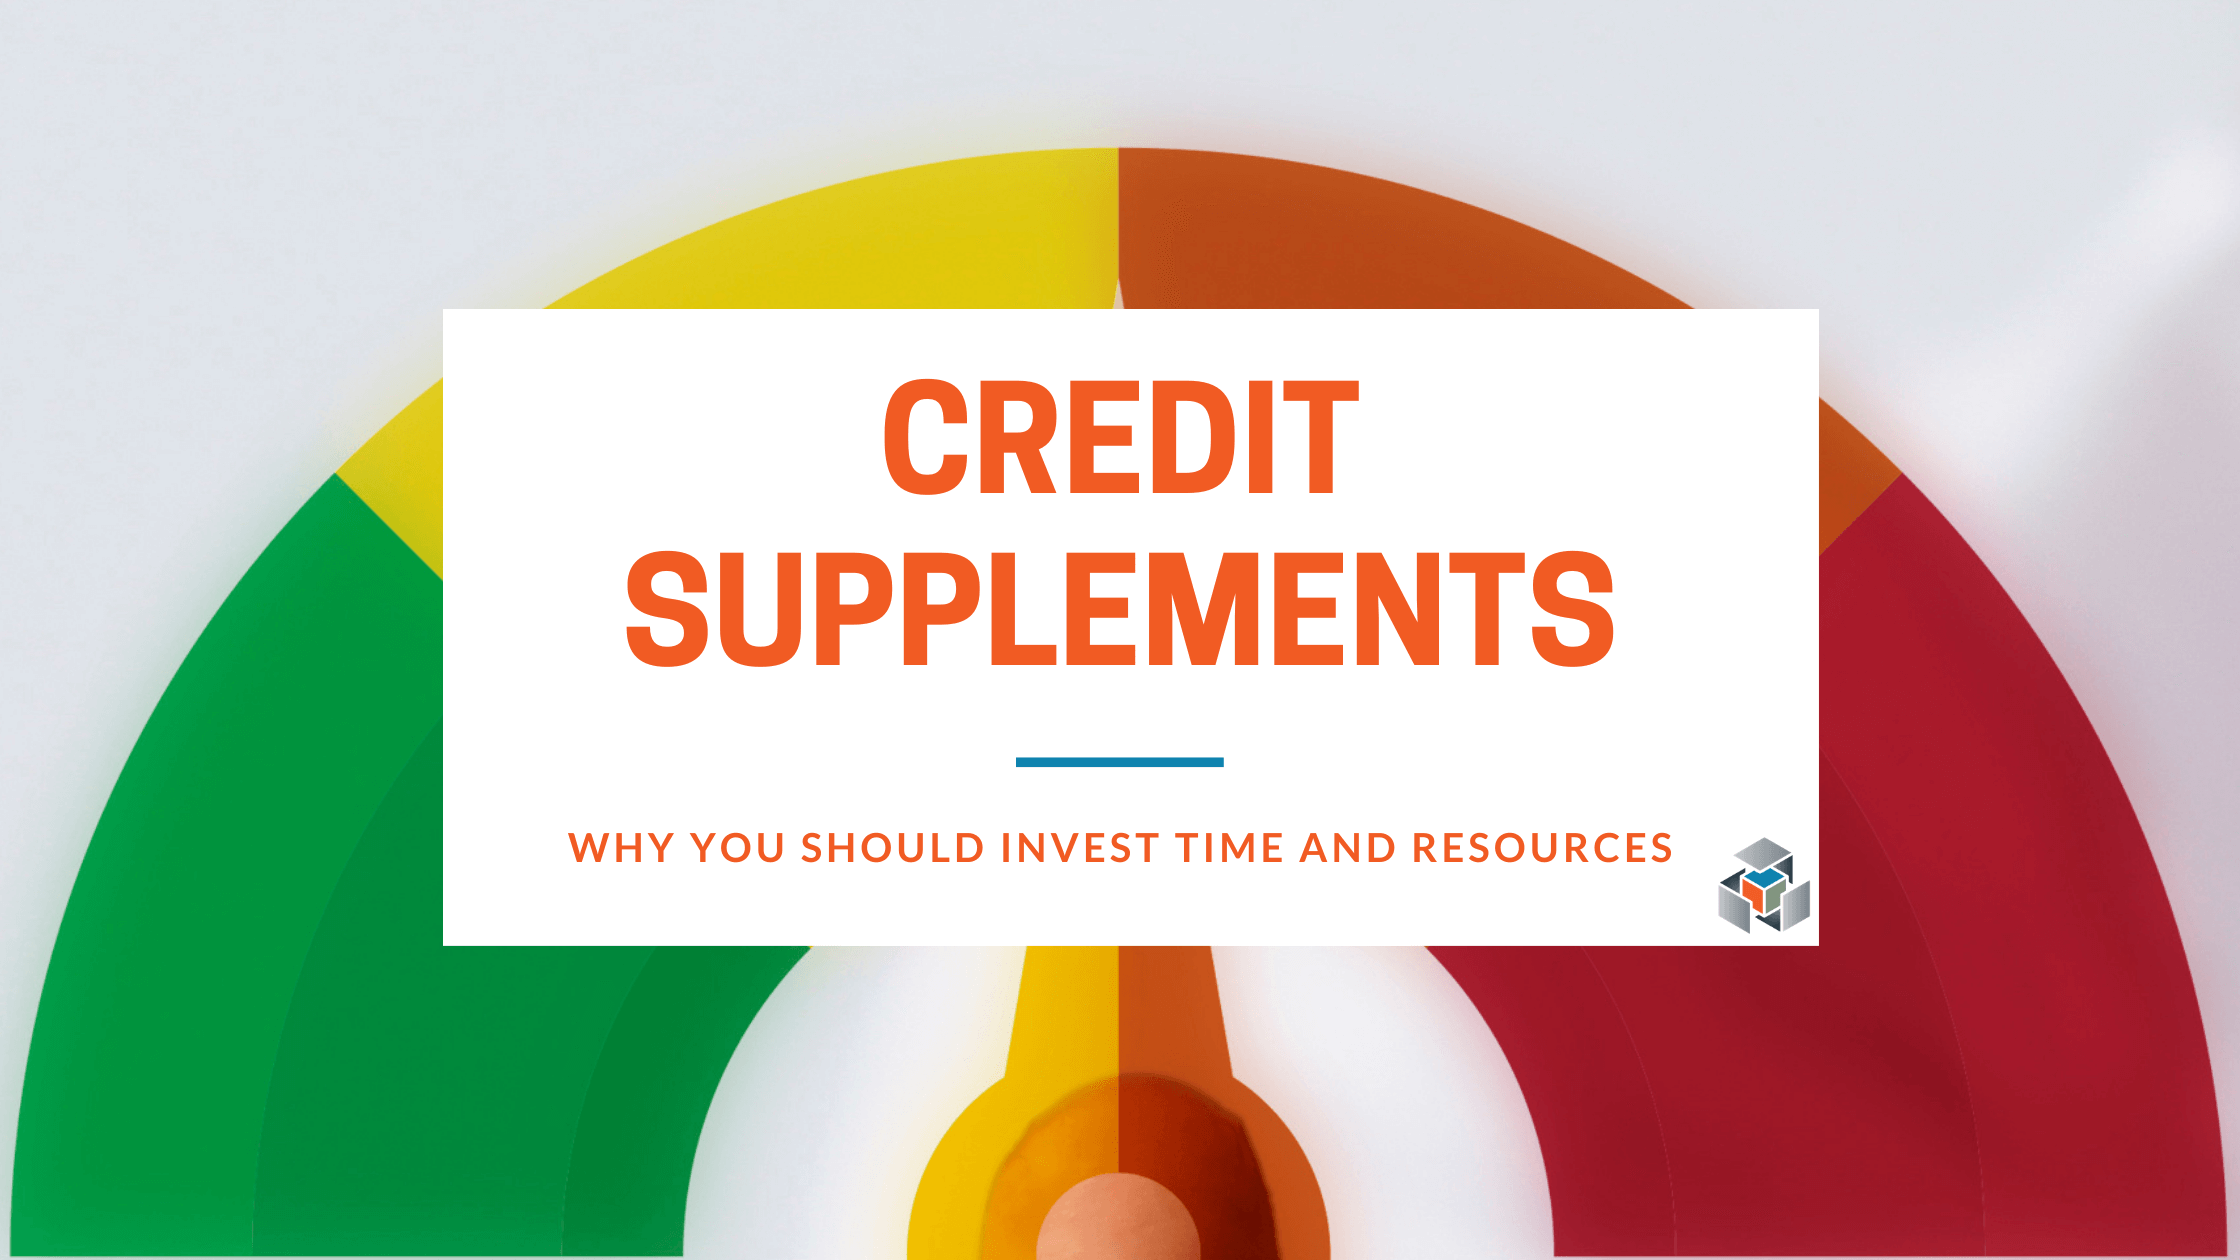 What are Credit Supplements & Why Are They Important?